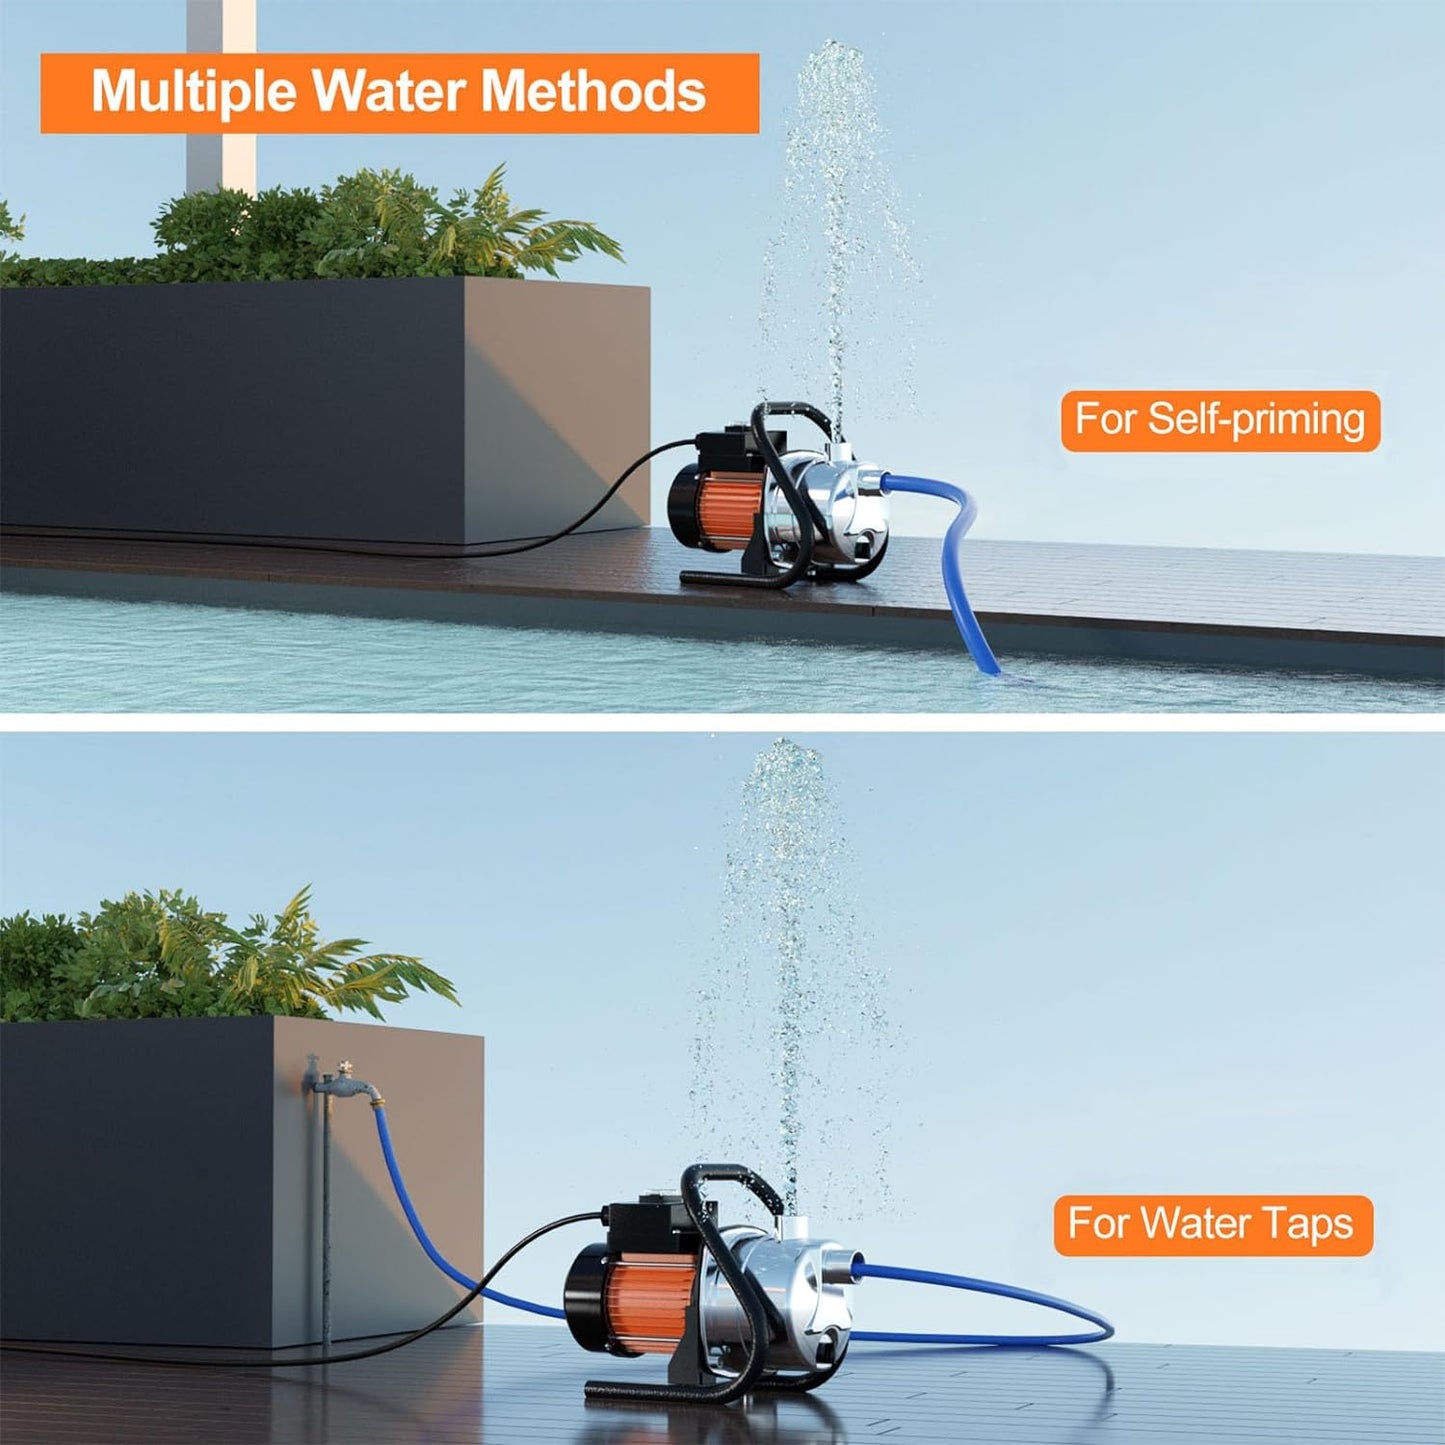 1.6HP Portable Shallow Well, Water Transfer, Lawn/Garden Irrigation, or Draining Pump 110V